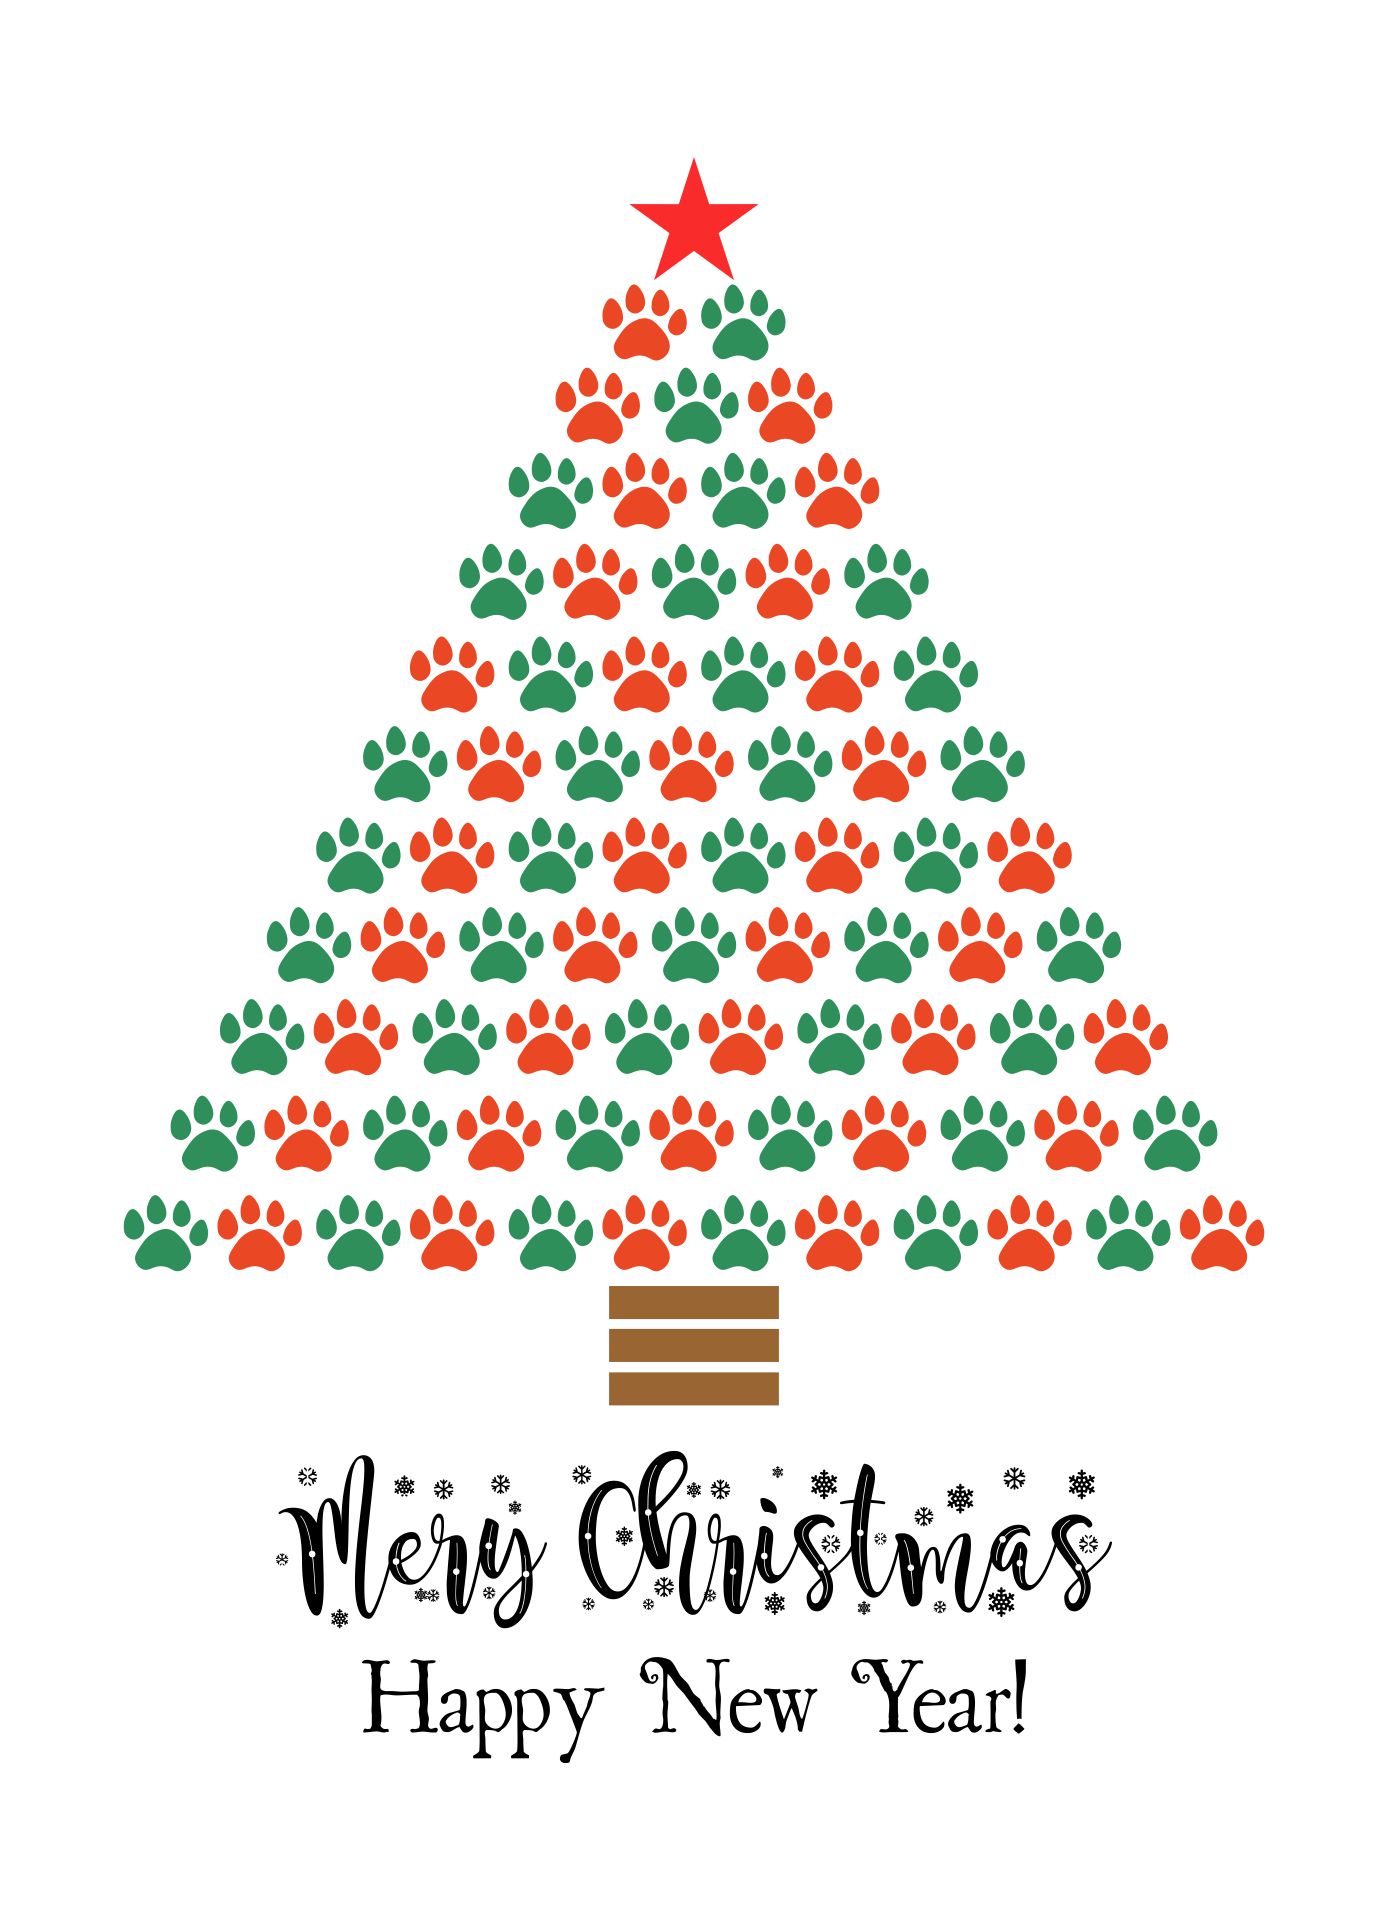 Printable Christmas Tree Made With Paw Print Happy New Year And Mery Christmas